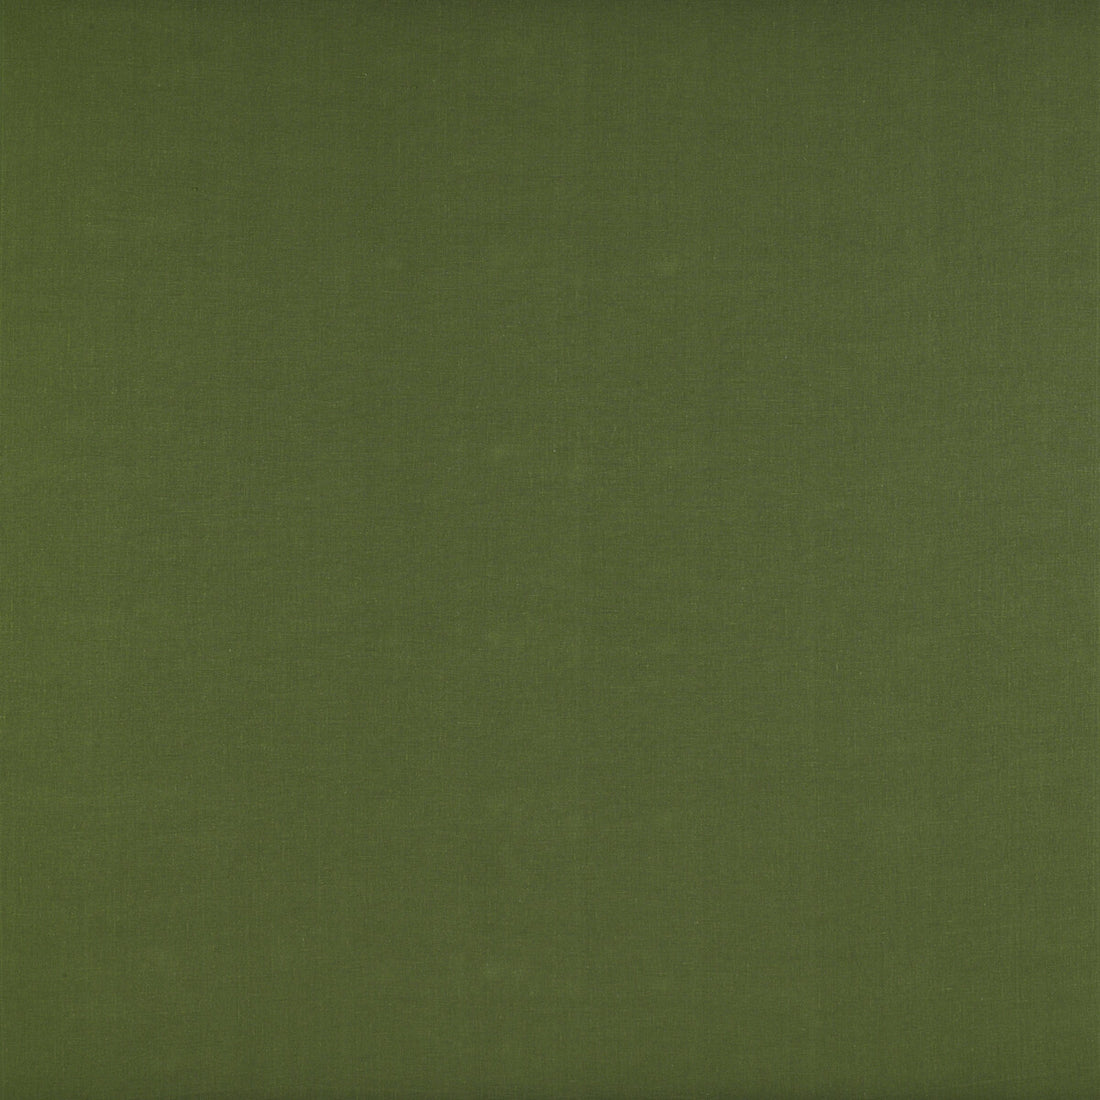 Recoletos fabric in verde color - pattern GDT5203.022.0 - by Gaston y Daniela in the Madrid collection